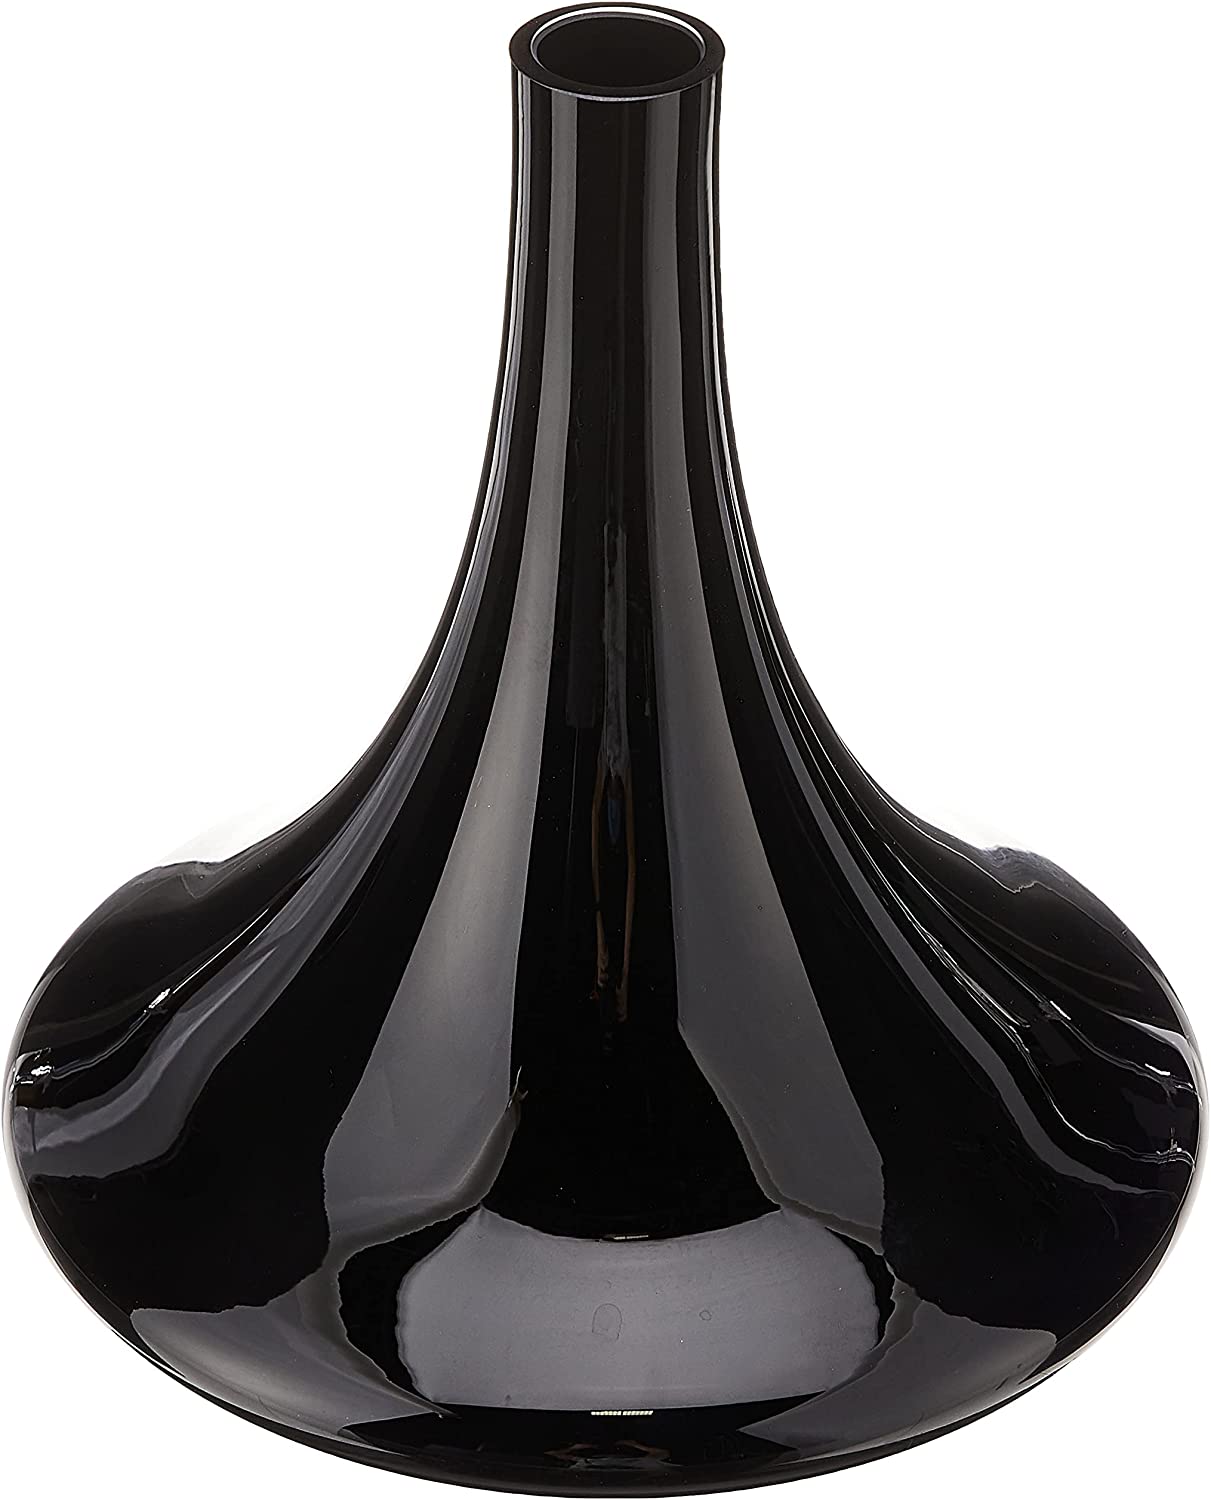 Stölzle Lausitz Decanter Teide Vulkanos Mouth-Blown / Red Wine Decanter with Special Look / Wine Decanter for Unfolding the Aromas and Chic Presentation